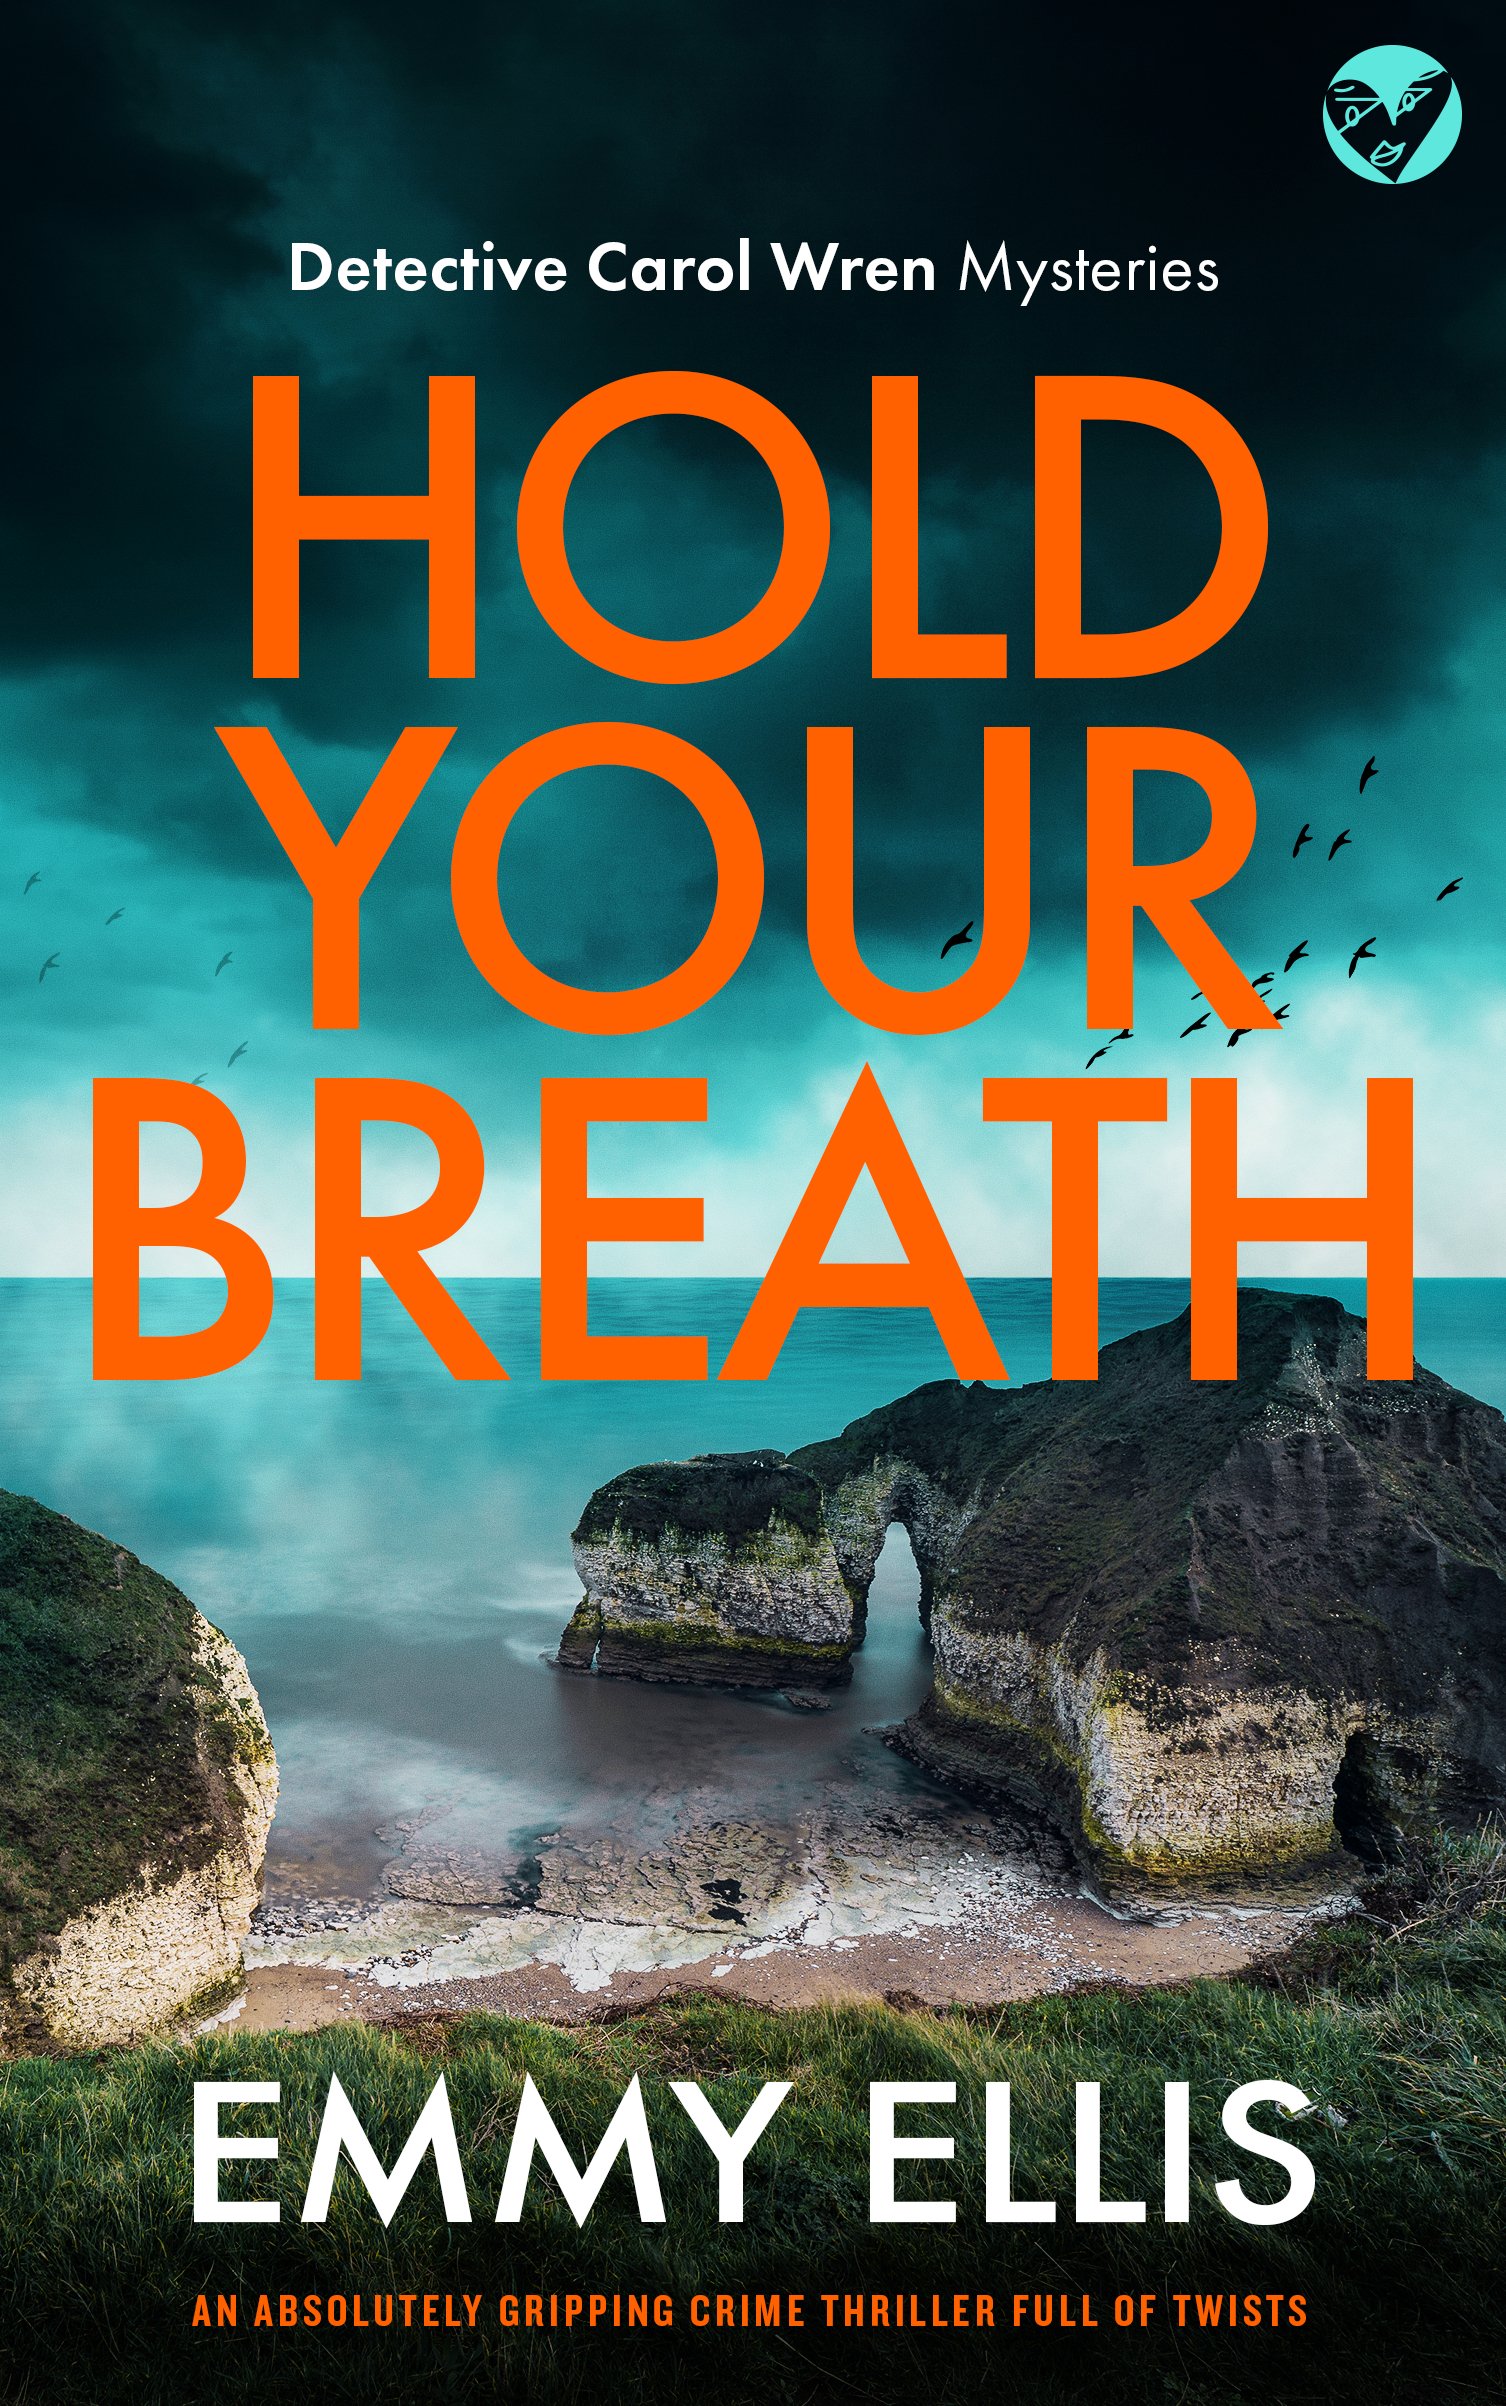 HOLD YOUR BREATH Cover publish.jpg